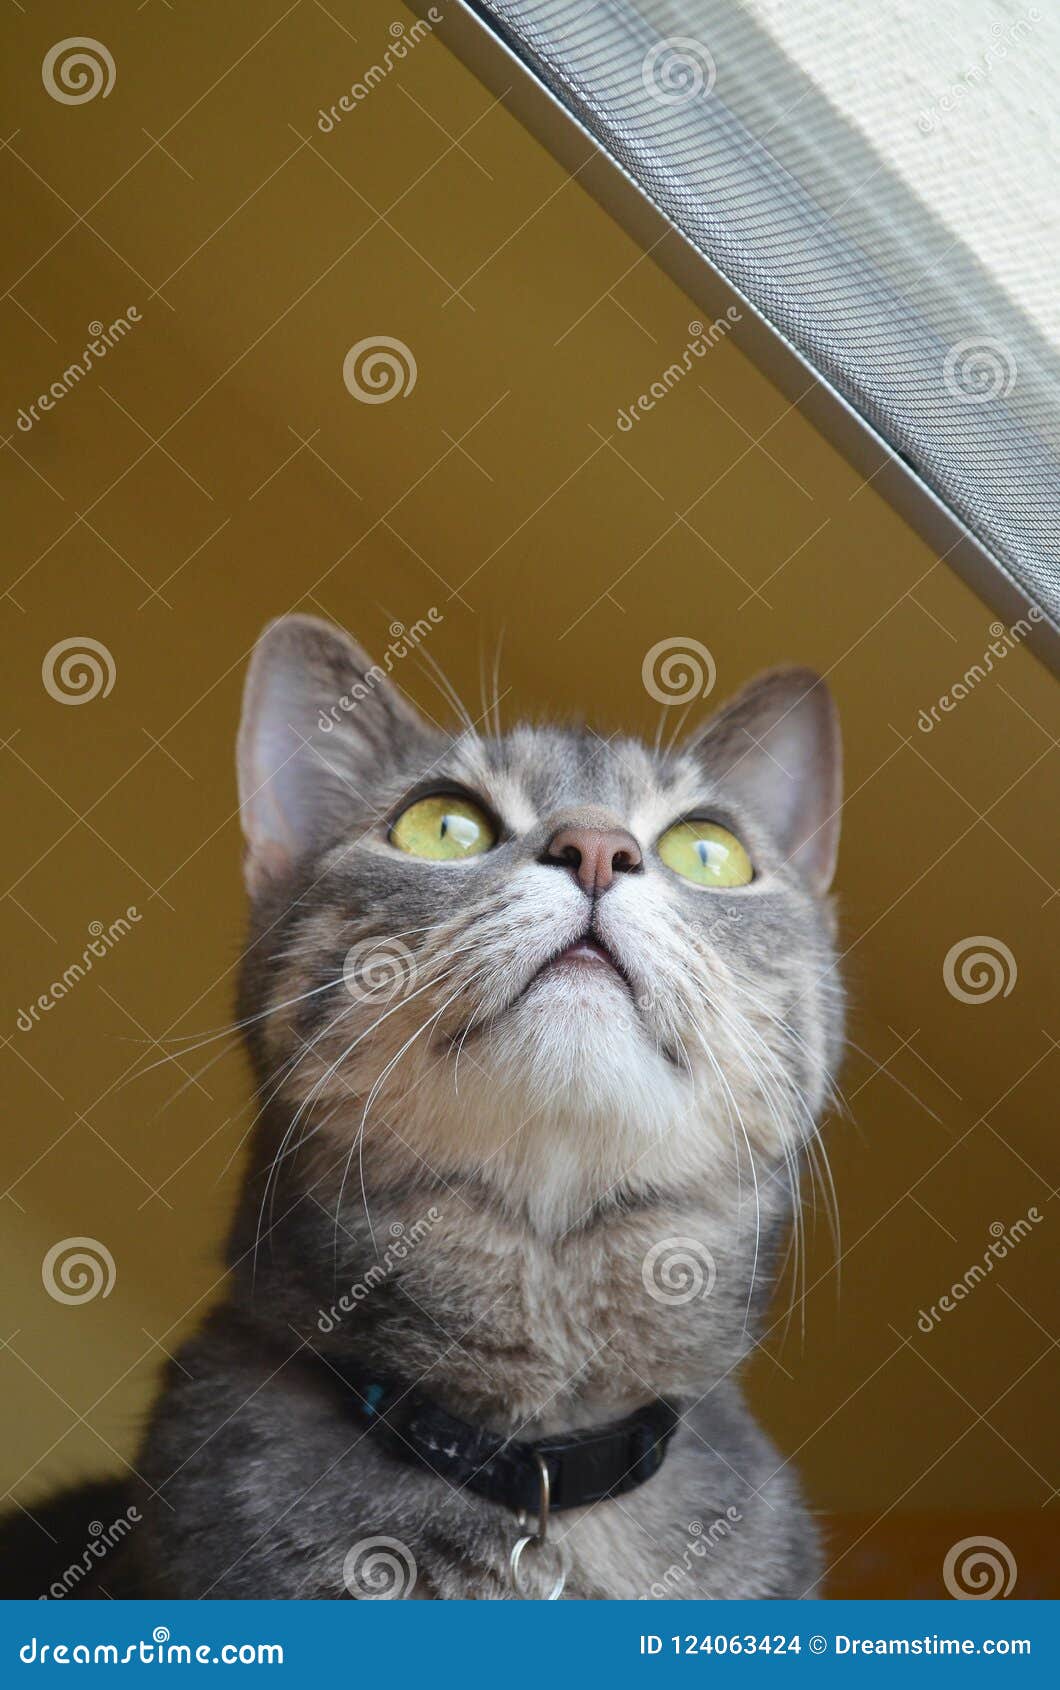 Cat with green eyes stock photo. Image of lovely, furry - 124063424